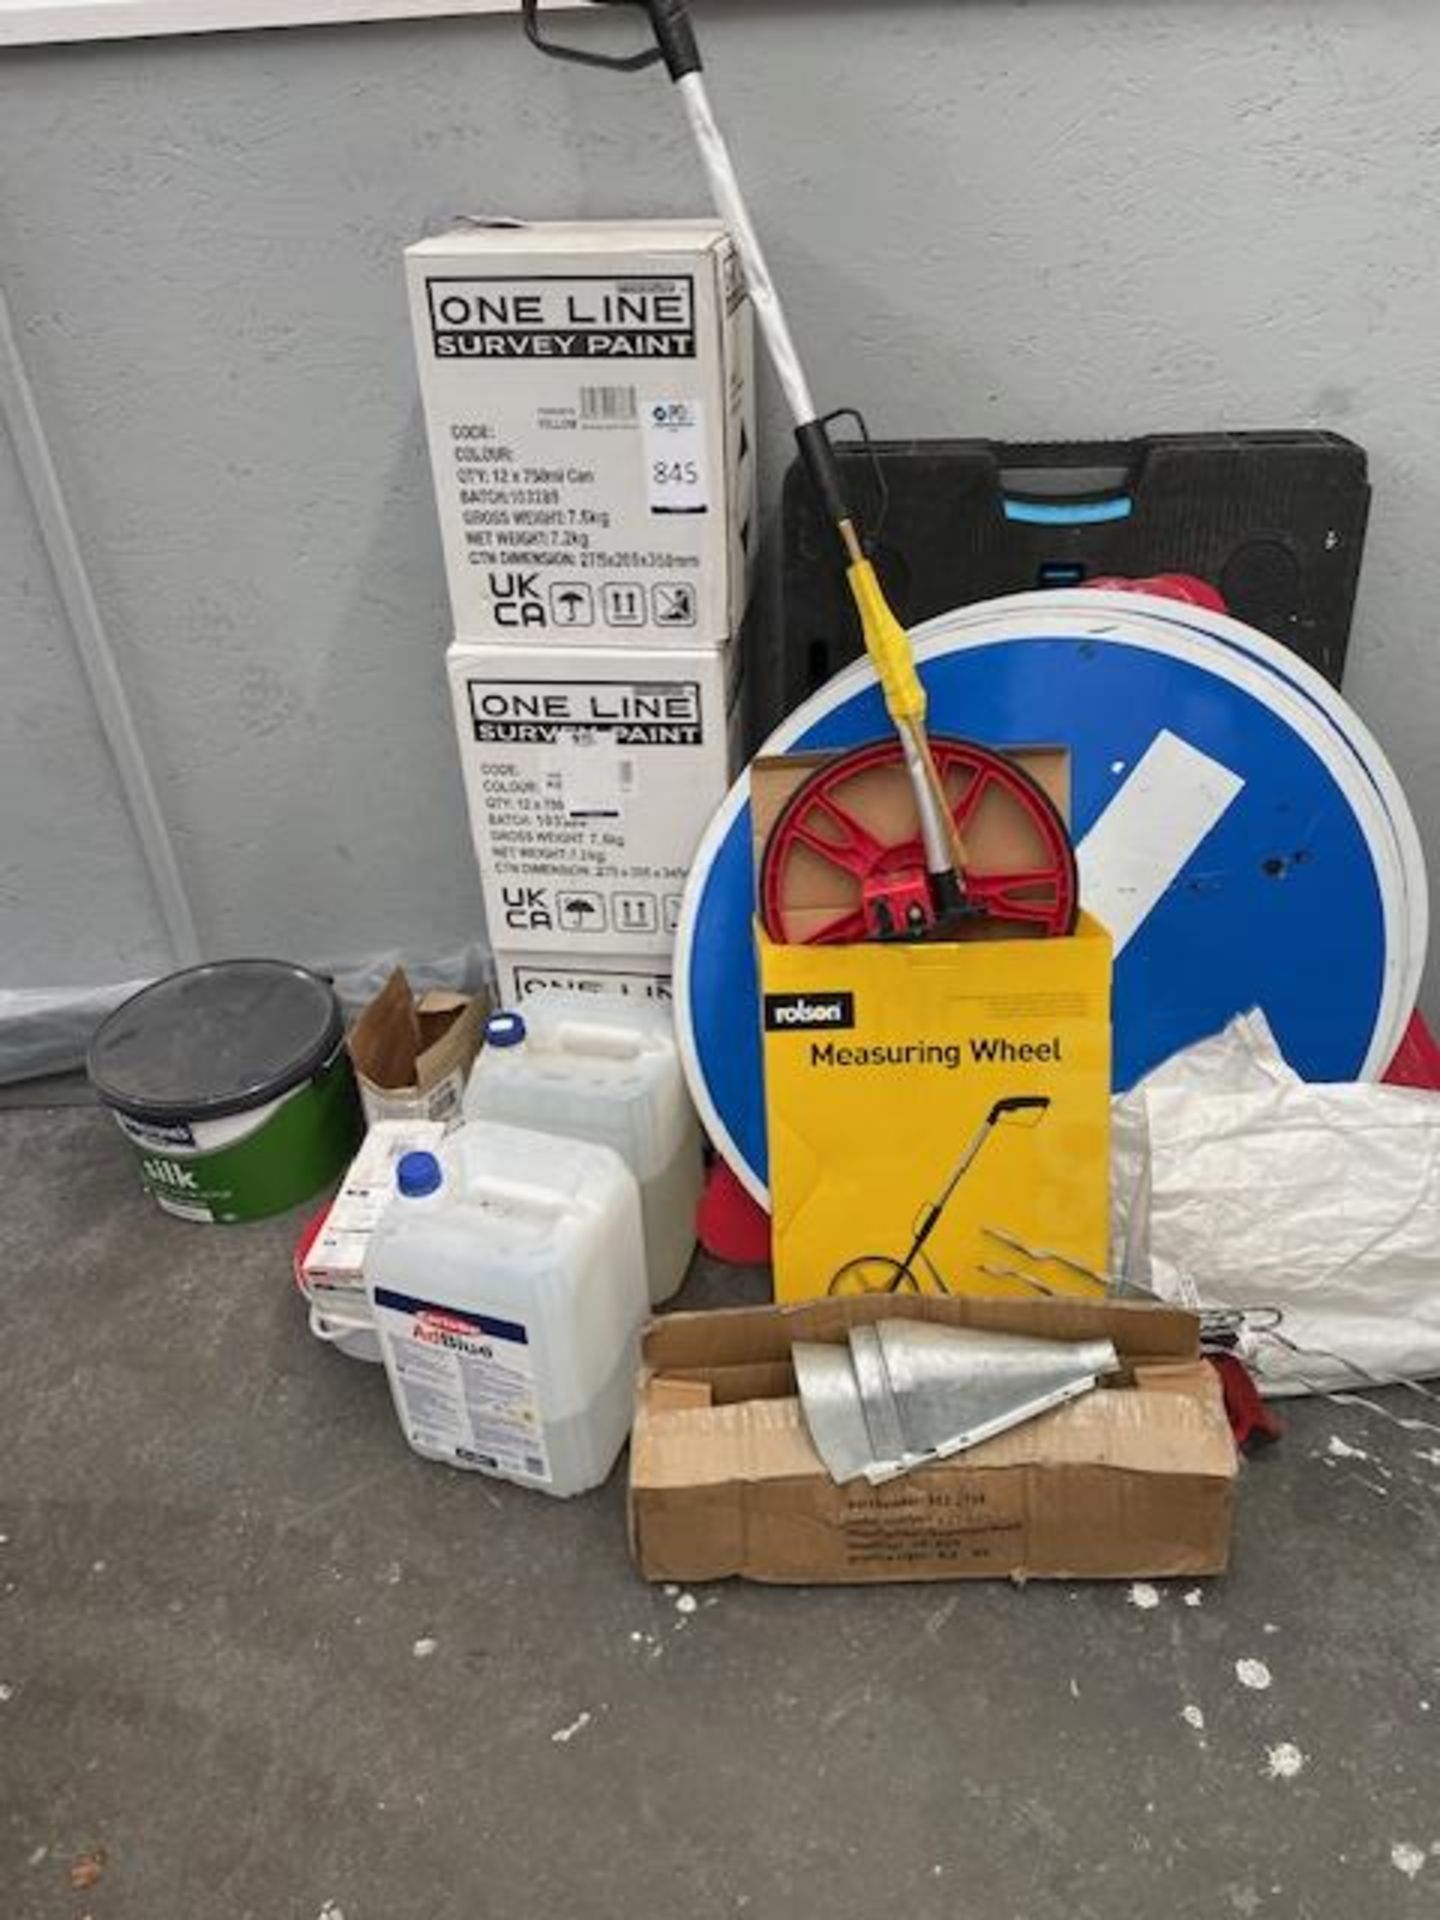 36 Canisters “One Line” Survey Paint, Quantity Ad Blue, Road Signs, Rolson Measuring Wheel, etc. (